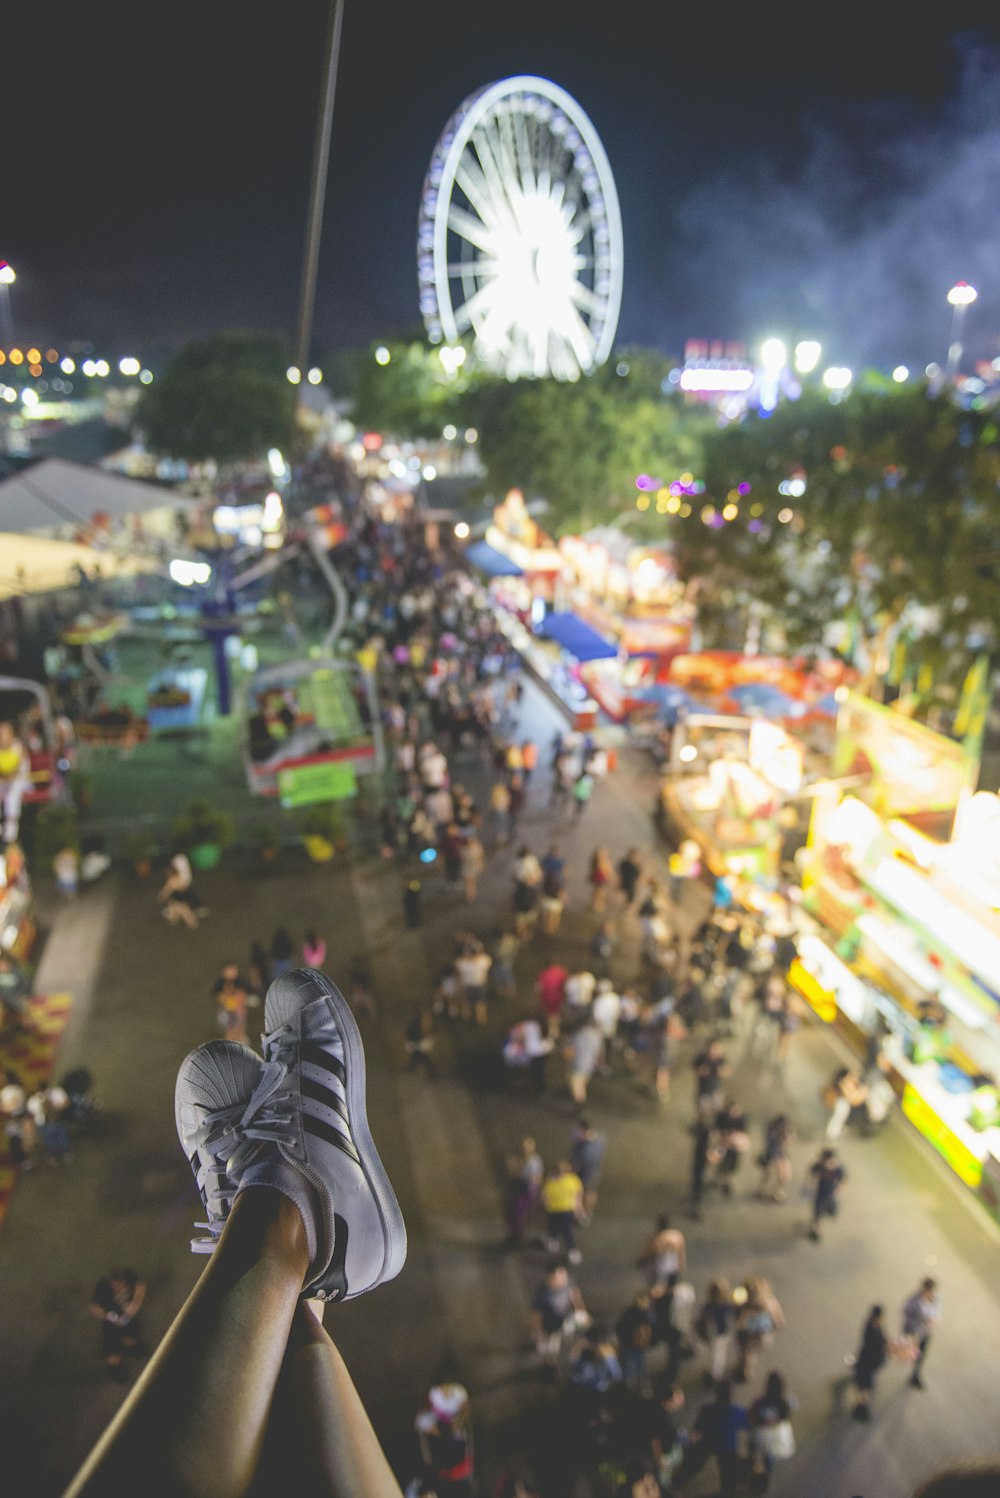 selective focus photo of person wearing sneakers and ferris wheel at distance